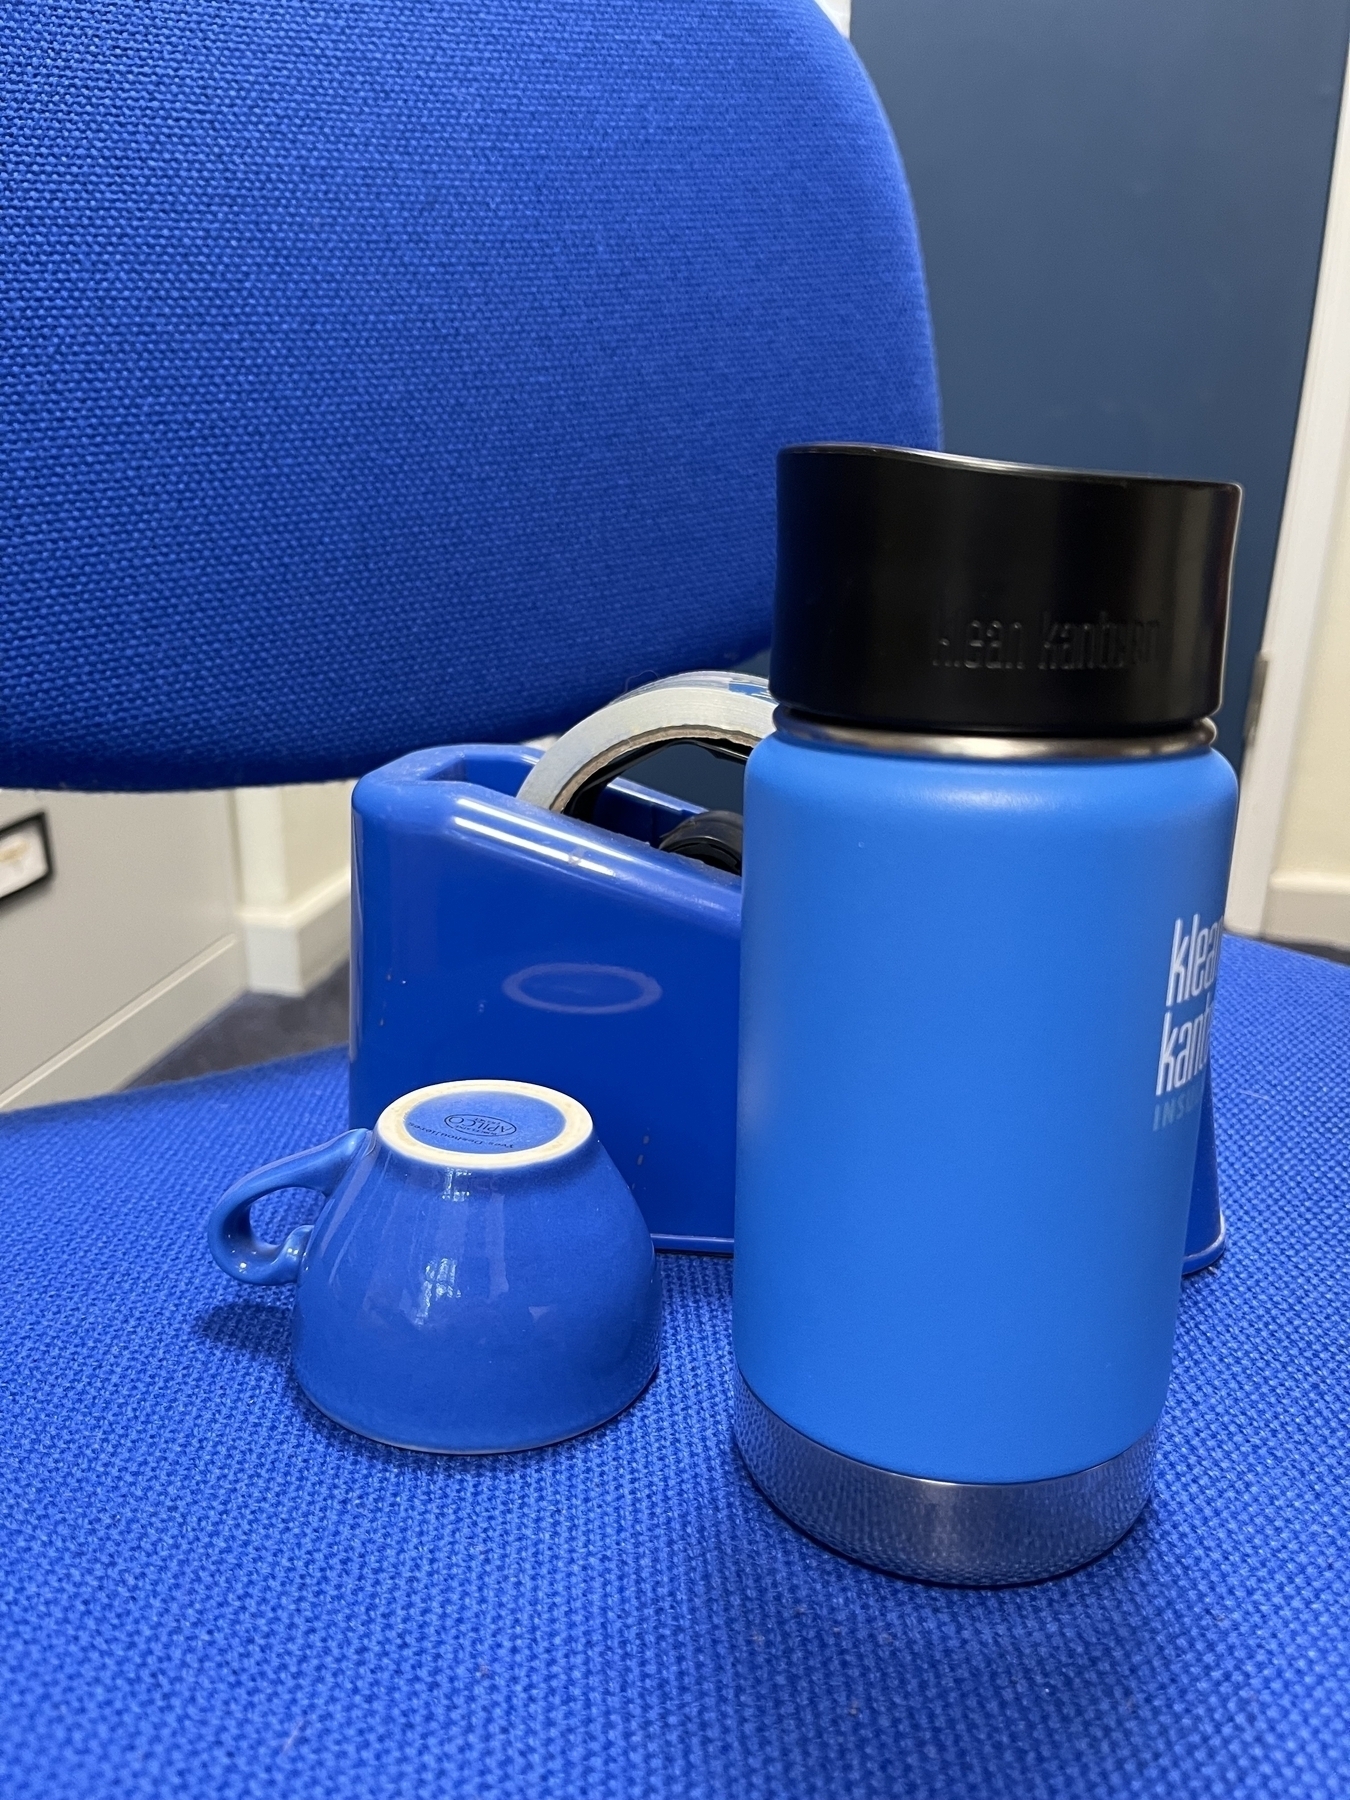 A group of blue objects on a blue office chair, with a blue door in the background: a tape dispenser, an espresso cup and a thermal travel mug.